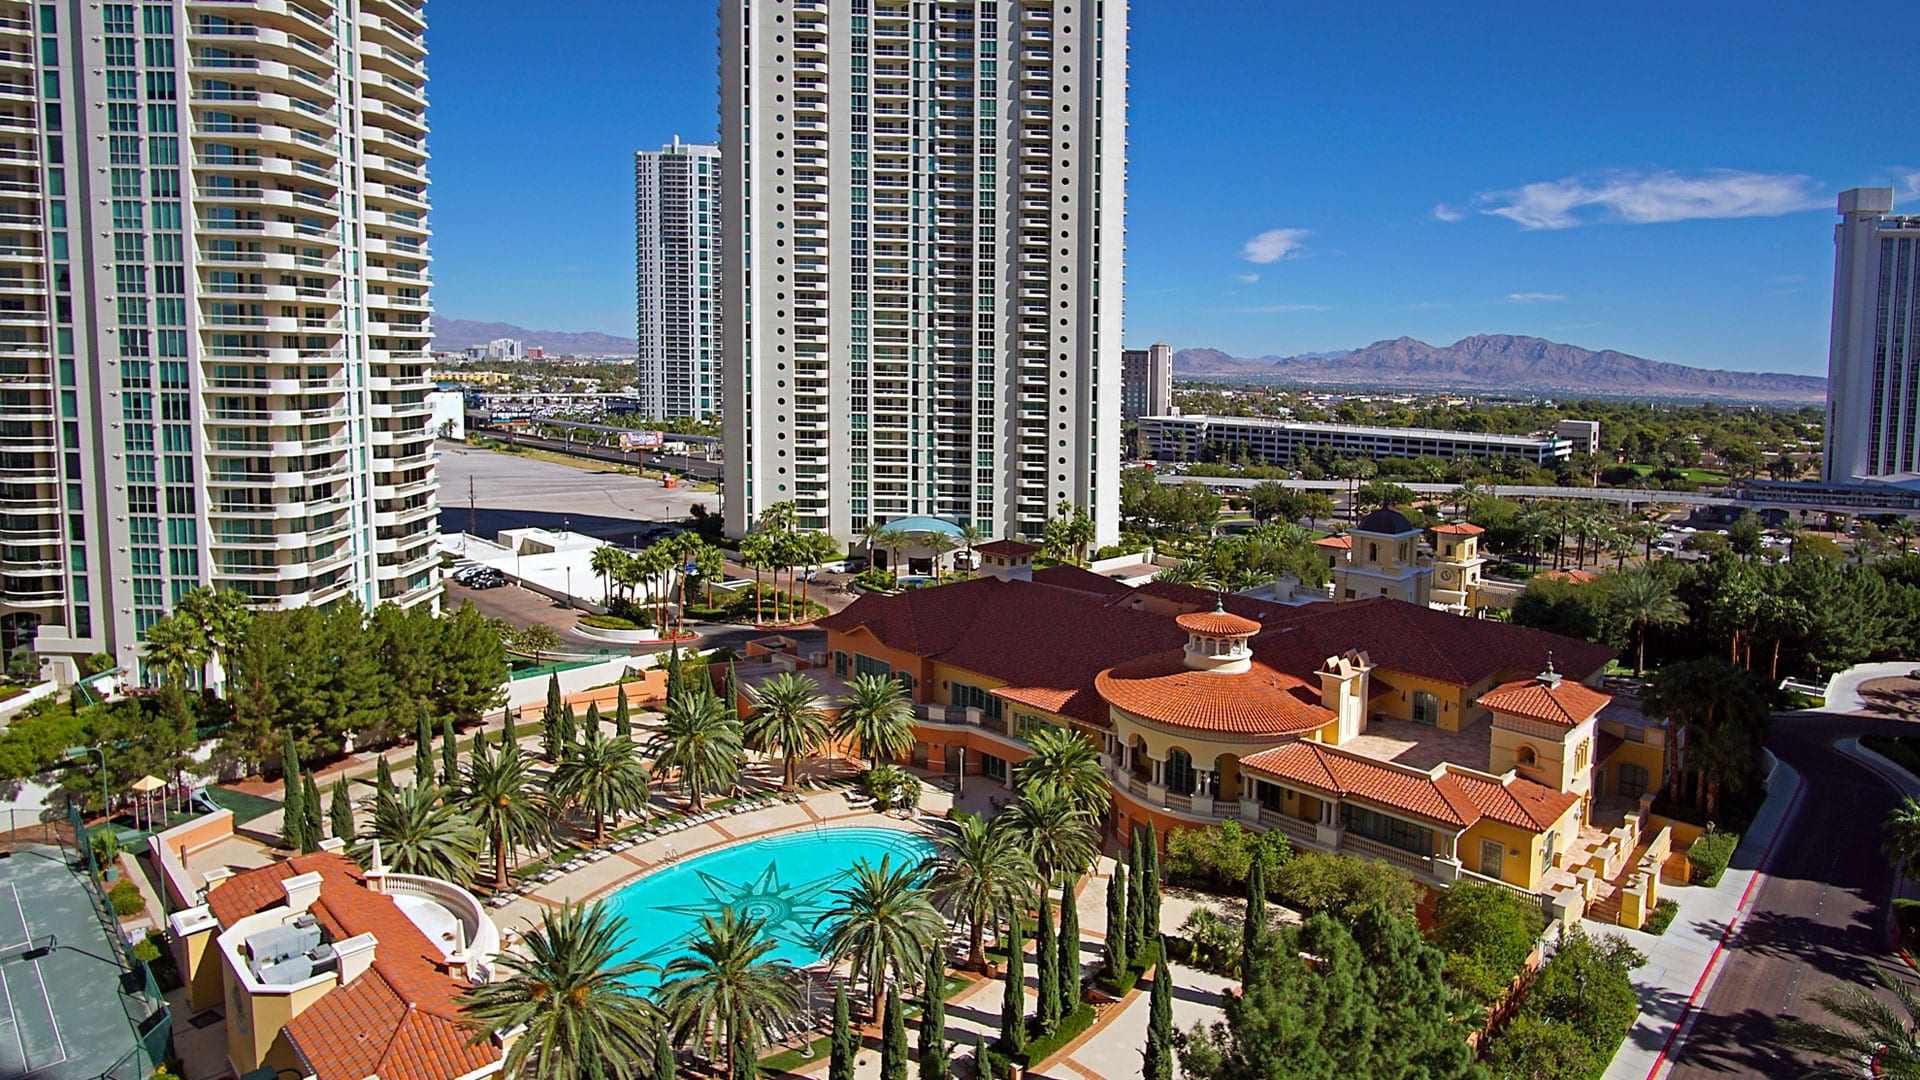 A vibrant Las Vegas luxury high-rise condo market with impressive sales and diverse options. Explore the two $8 million penthouses, high-rise condos in various areas, and their features. Discover the leading properties like Turnberry Place and the Waldorf Astoria. Trust the experienced Smith King Team for buying or selling a home. Contact Jennifer at jennifer@smithteamlasvegas.com.